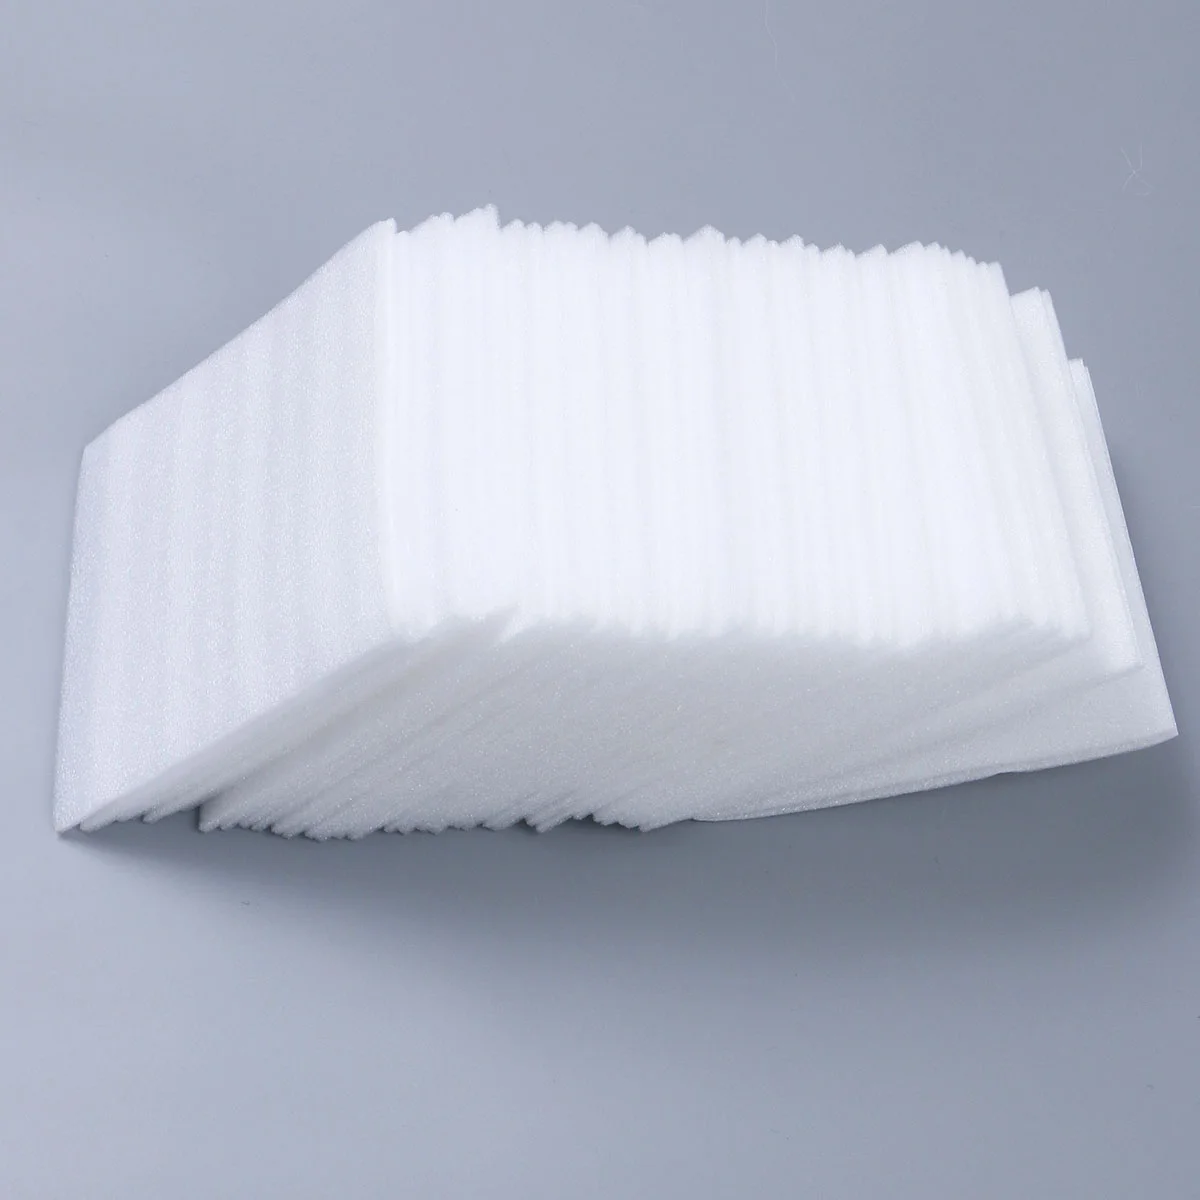 

40 Pcs White EPE Cushion Shock-absorbing Sheets Discs Dishes Vases Glasses Plates Fragile Items Protection Package Supplies